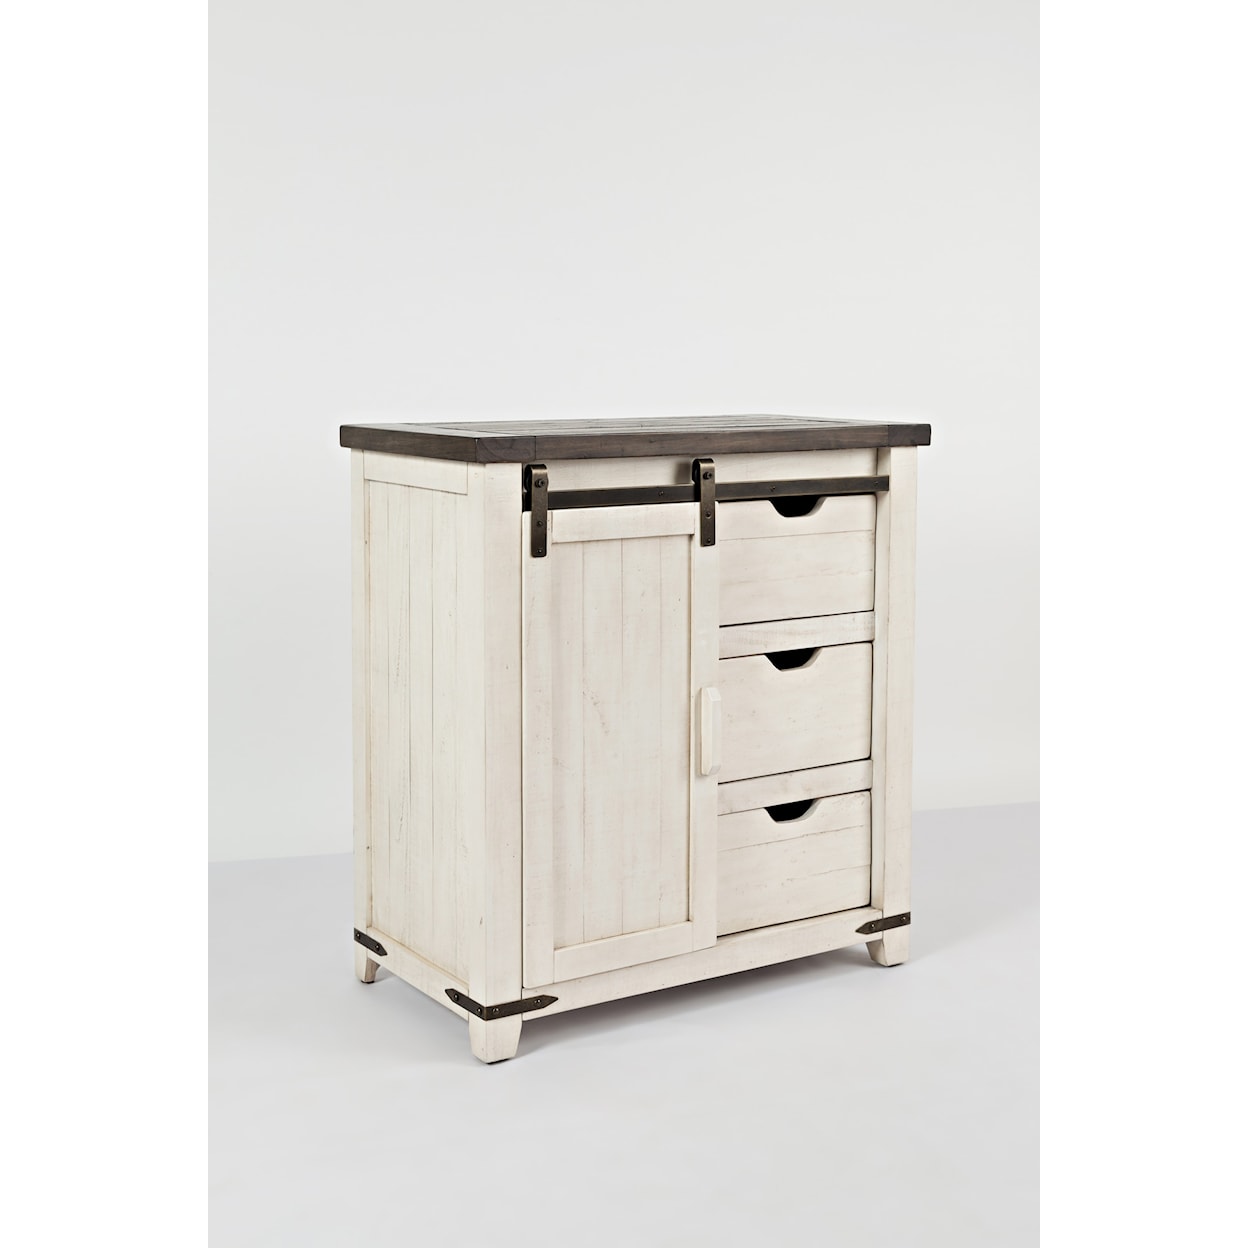 Jofran Stables Accent Cabinet